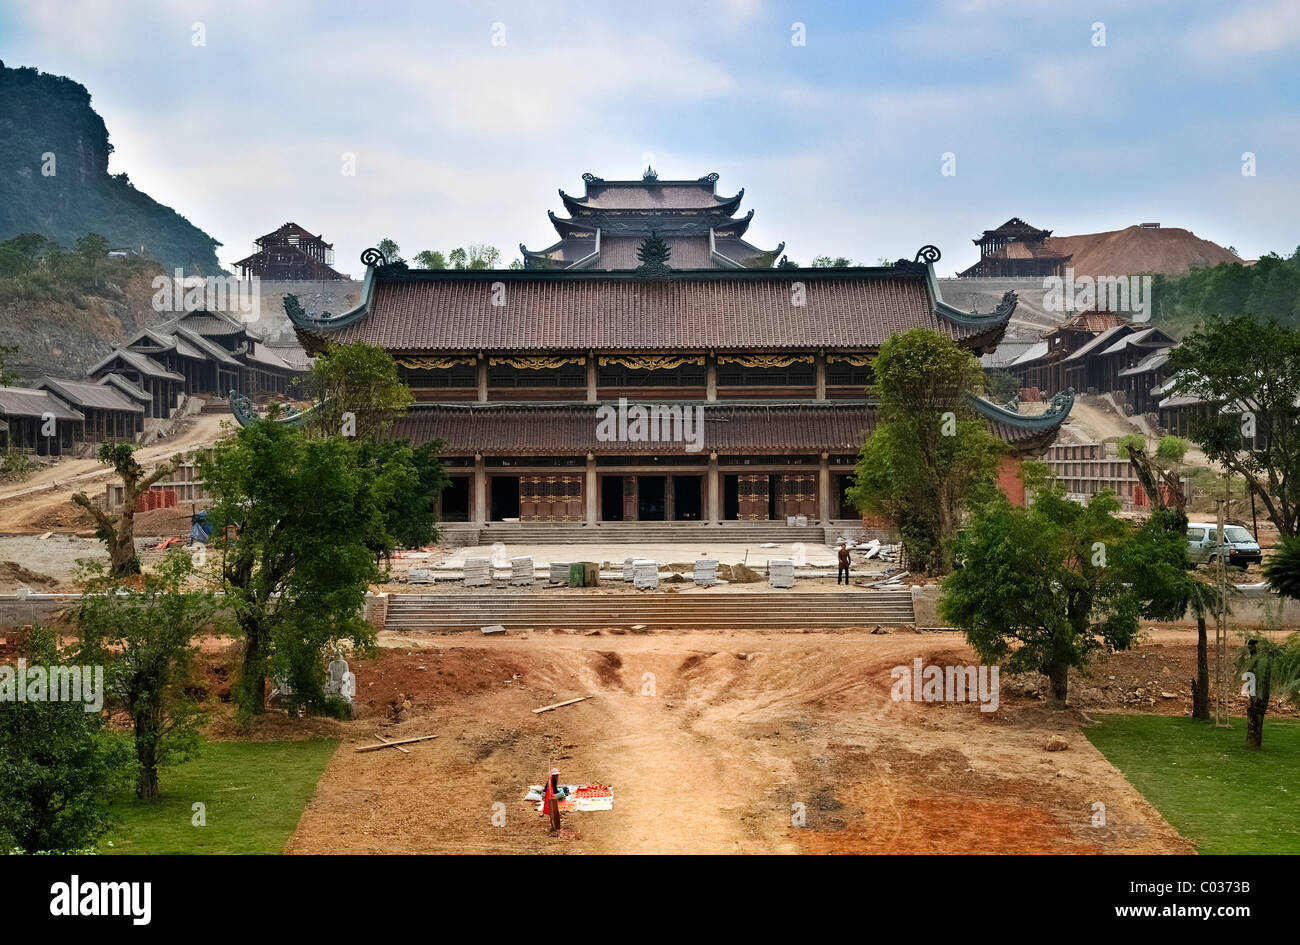 Chua Bain Dinh pagoda construction site, to become one of the largest pagodas of Southeast Asia, near Ninh Binh, Vietnam Stock Photo